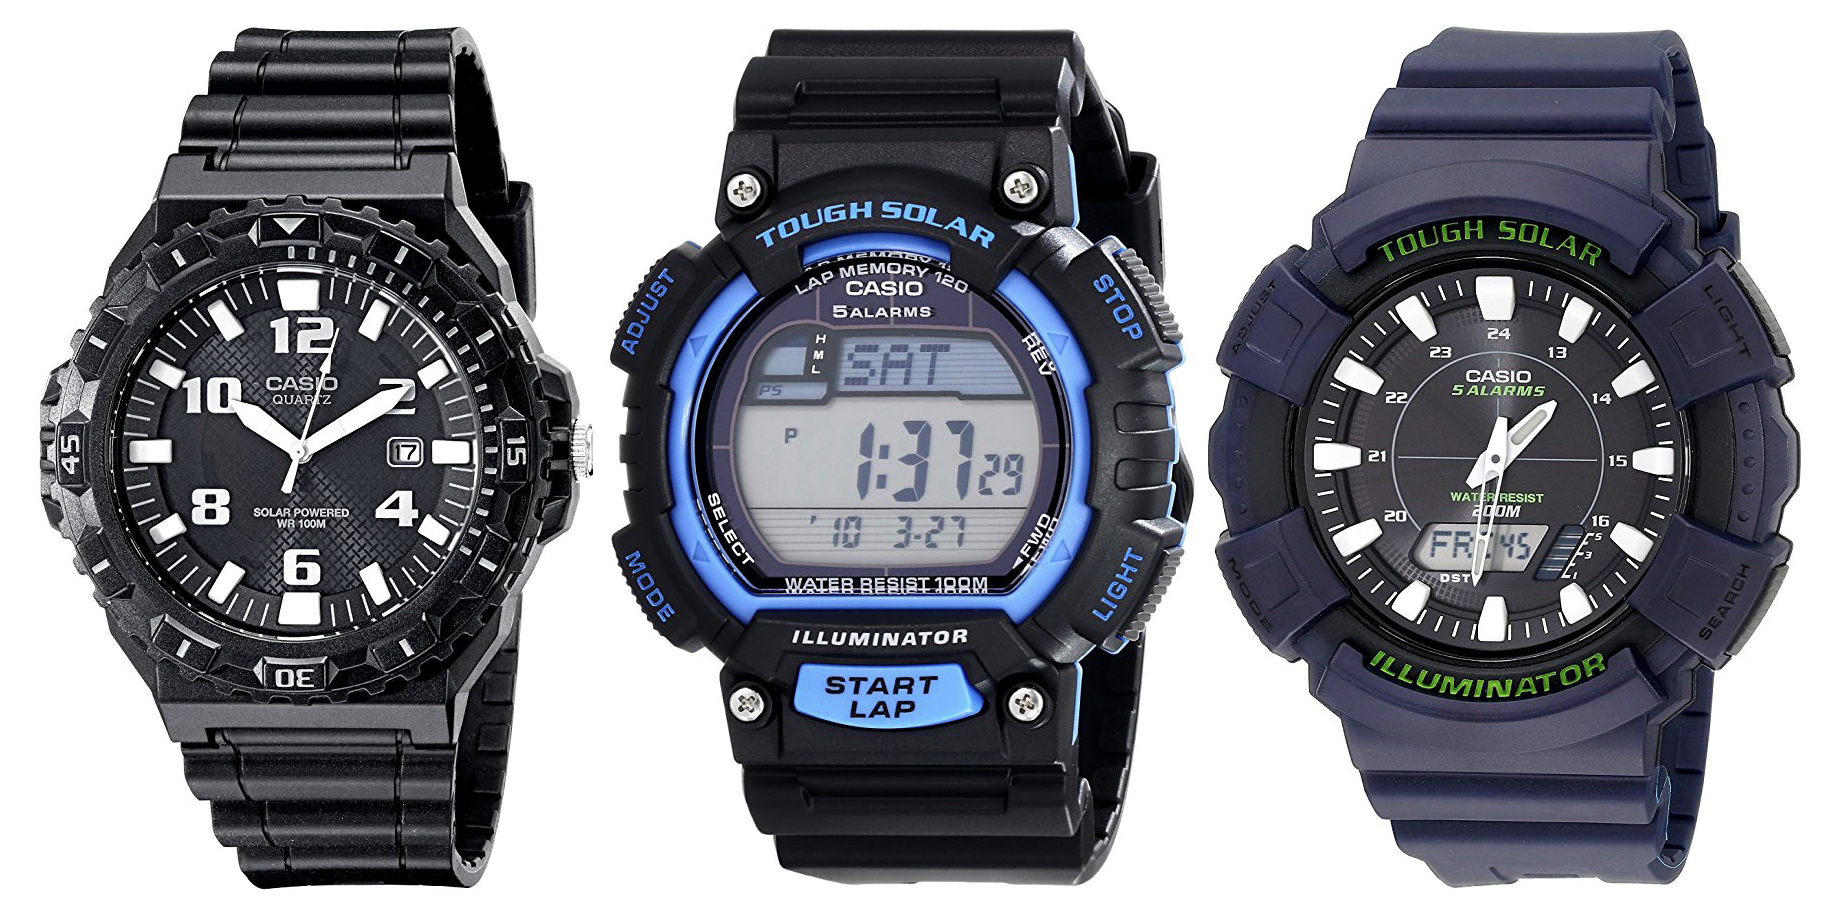 Casio Solar Watches from $17 in today's Amazon Gold Box - 9to5Toys